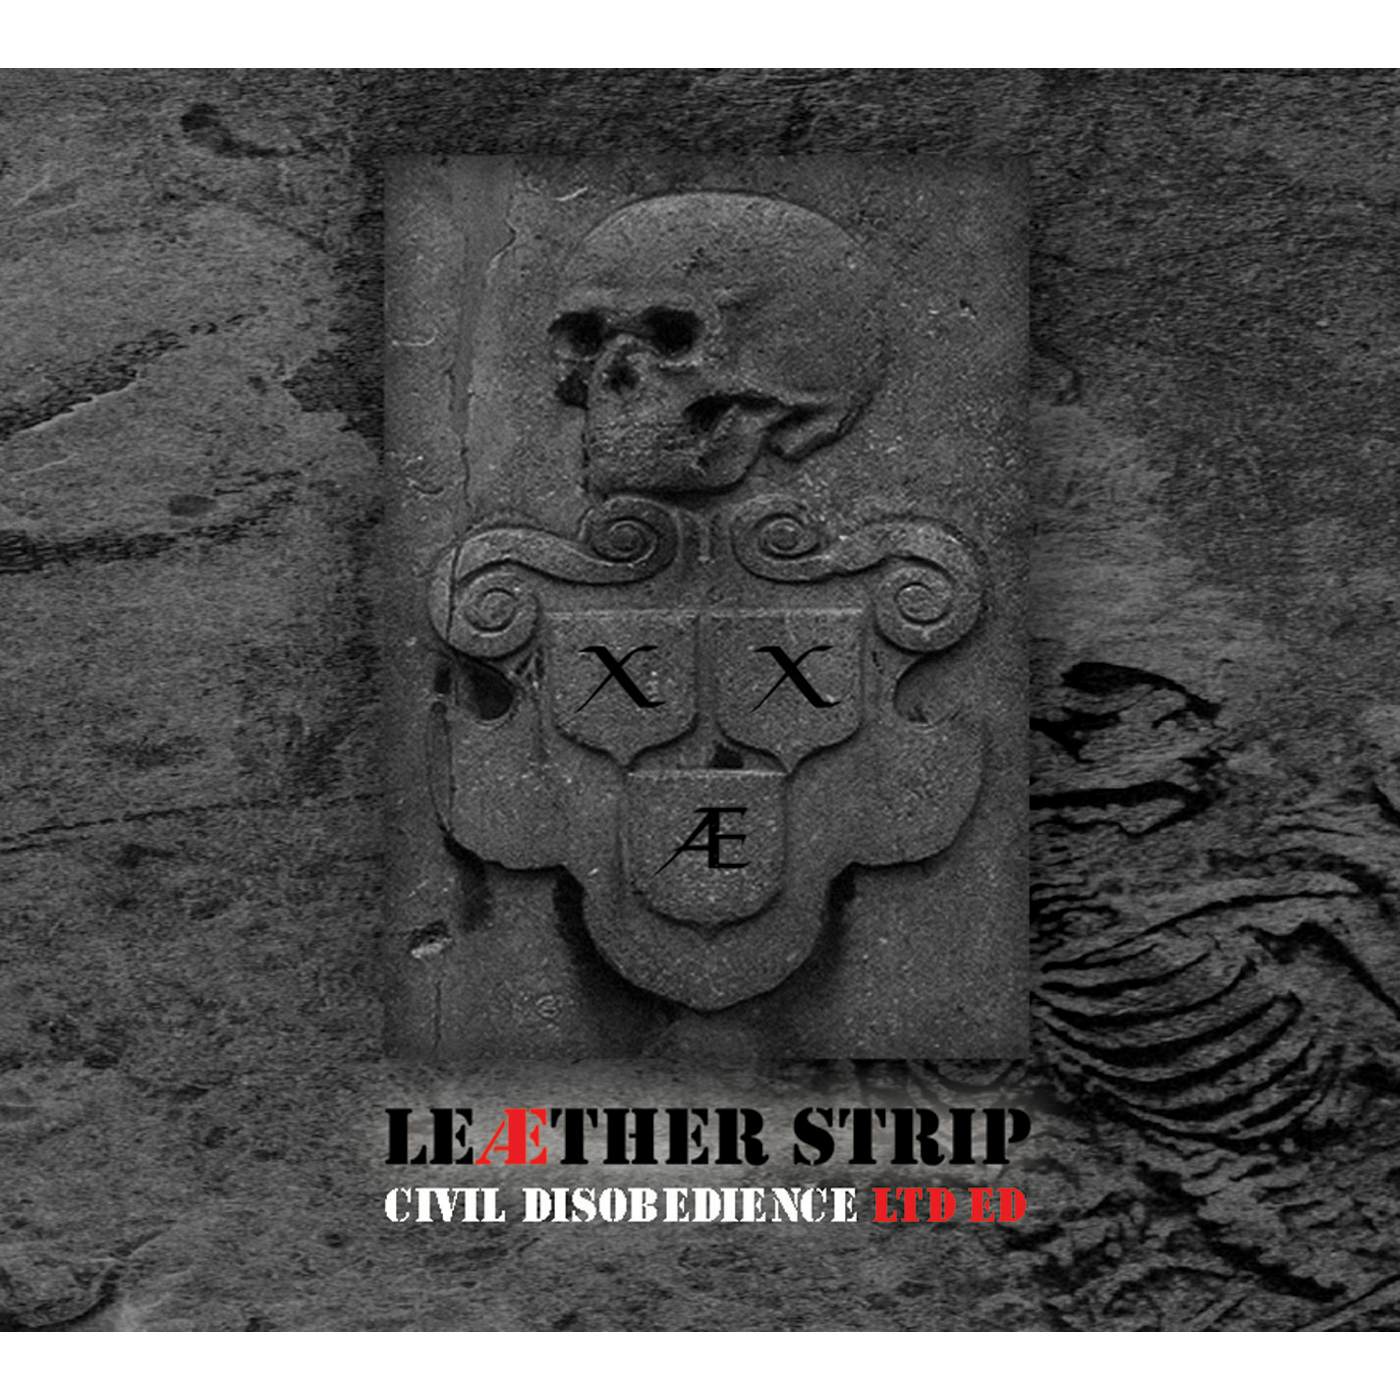 Leaether Strip CIVIL DISOBEDIENCE CD